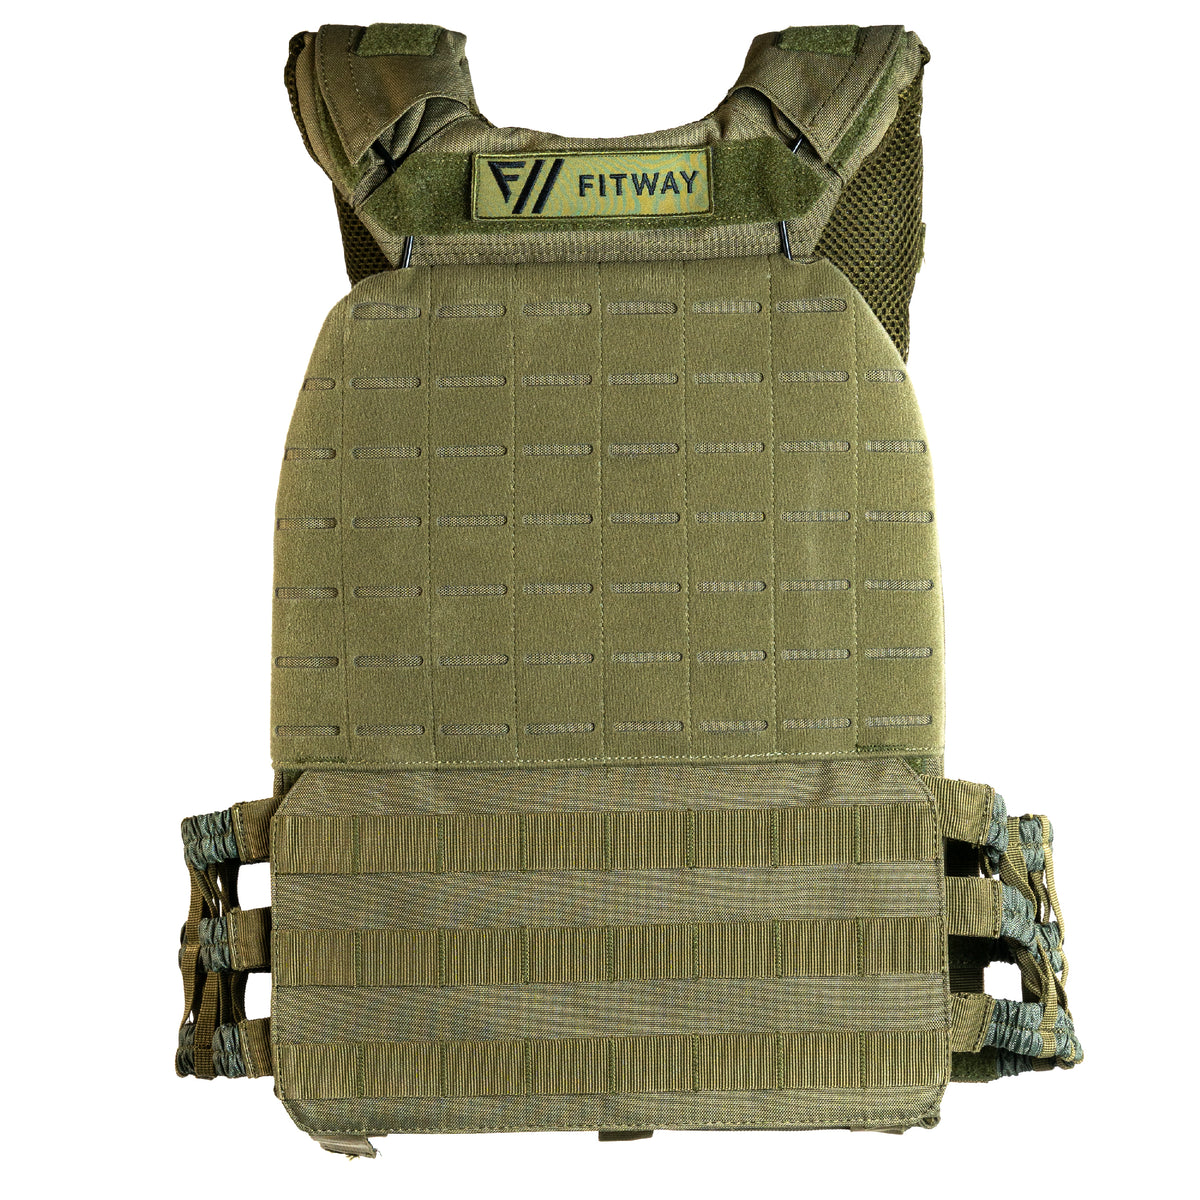 15kg Tactical Weighted Vest